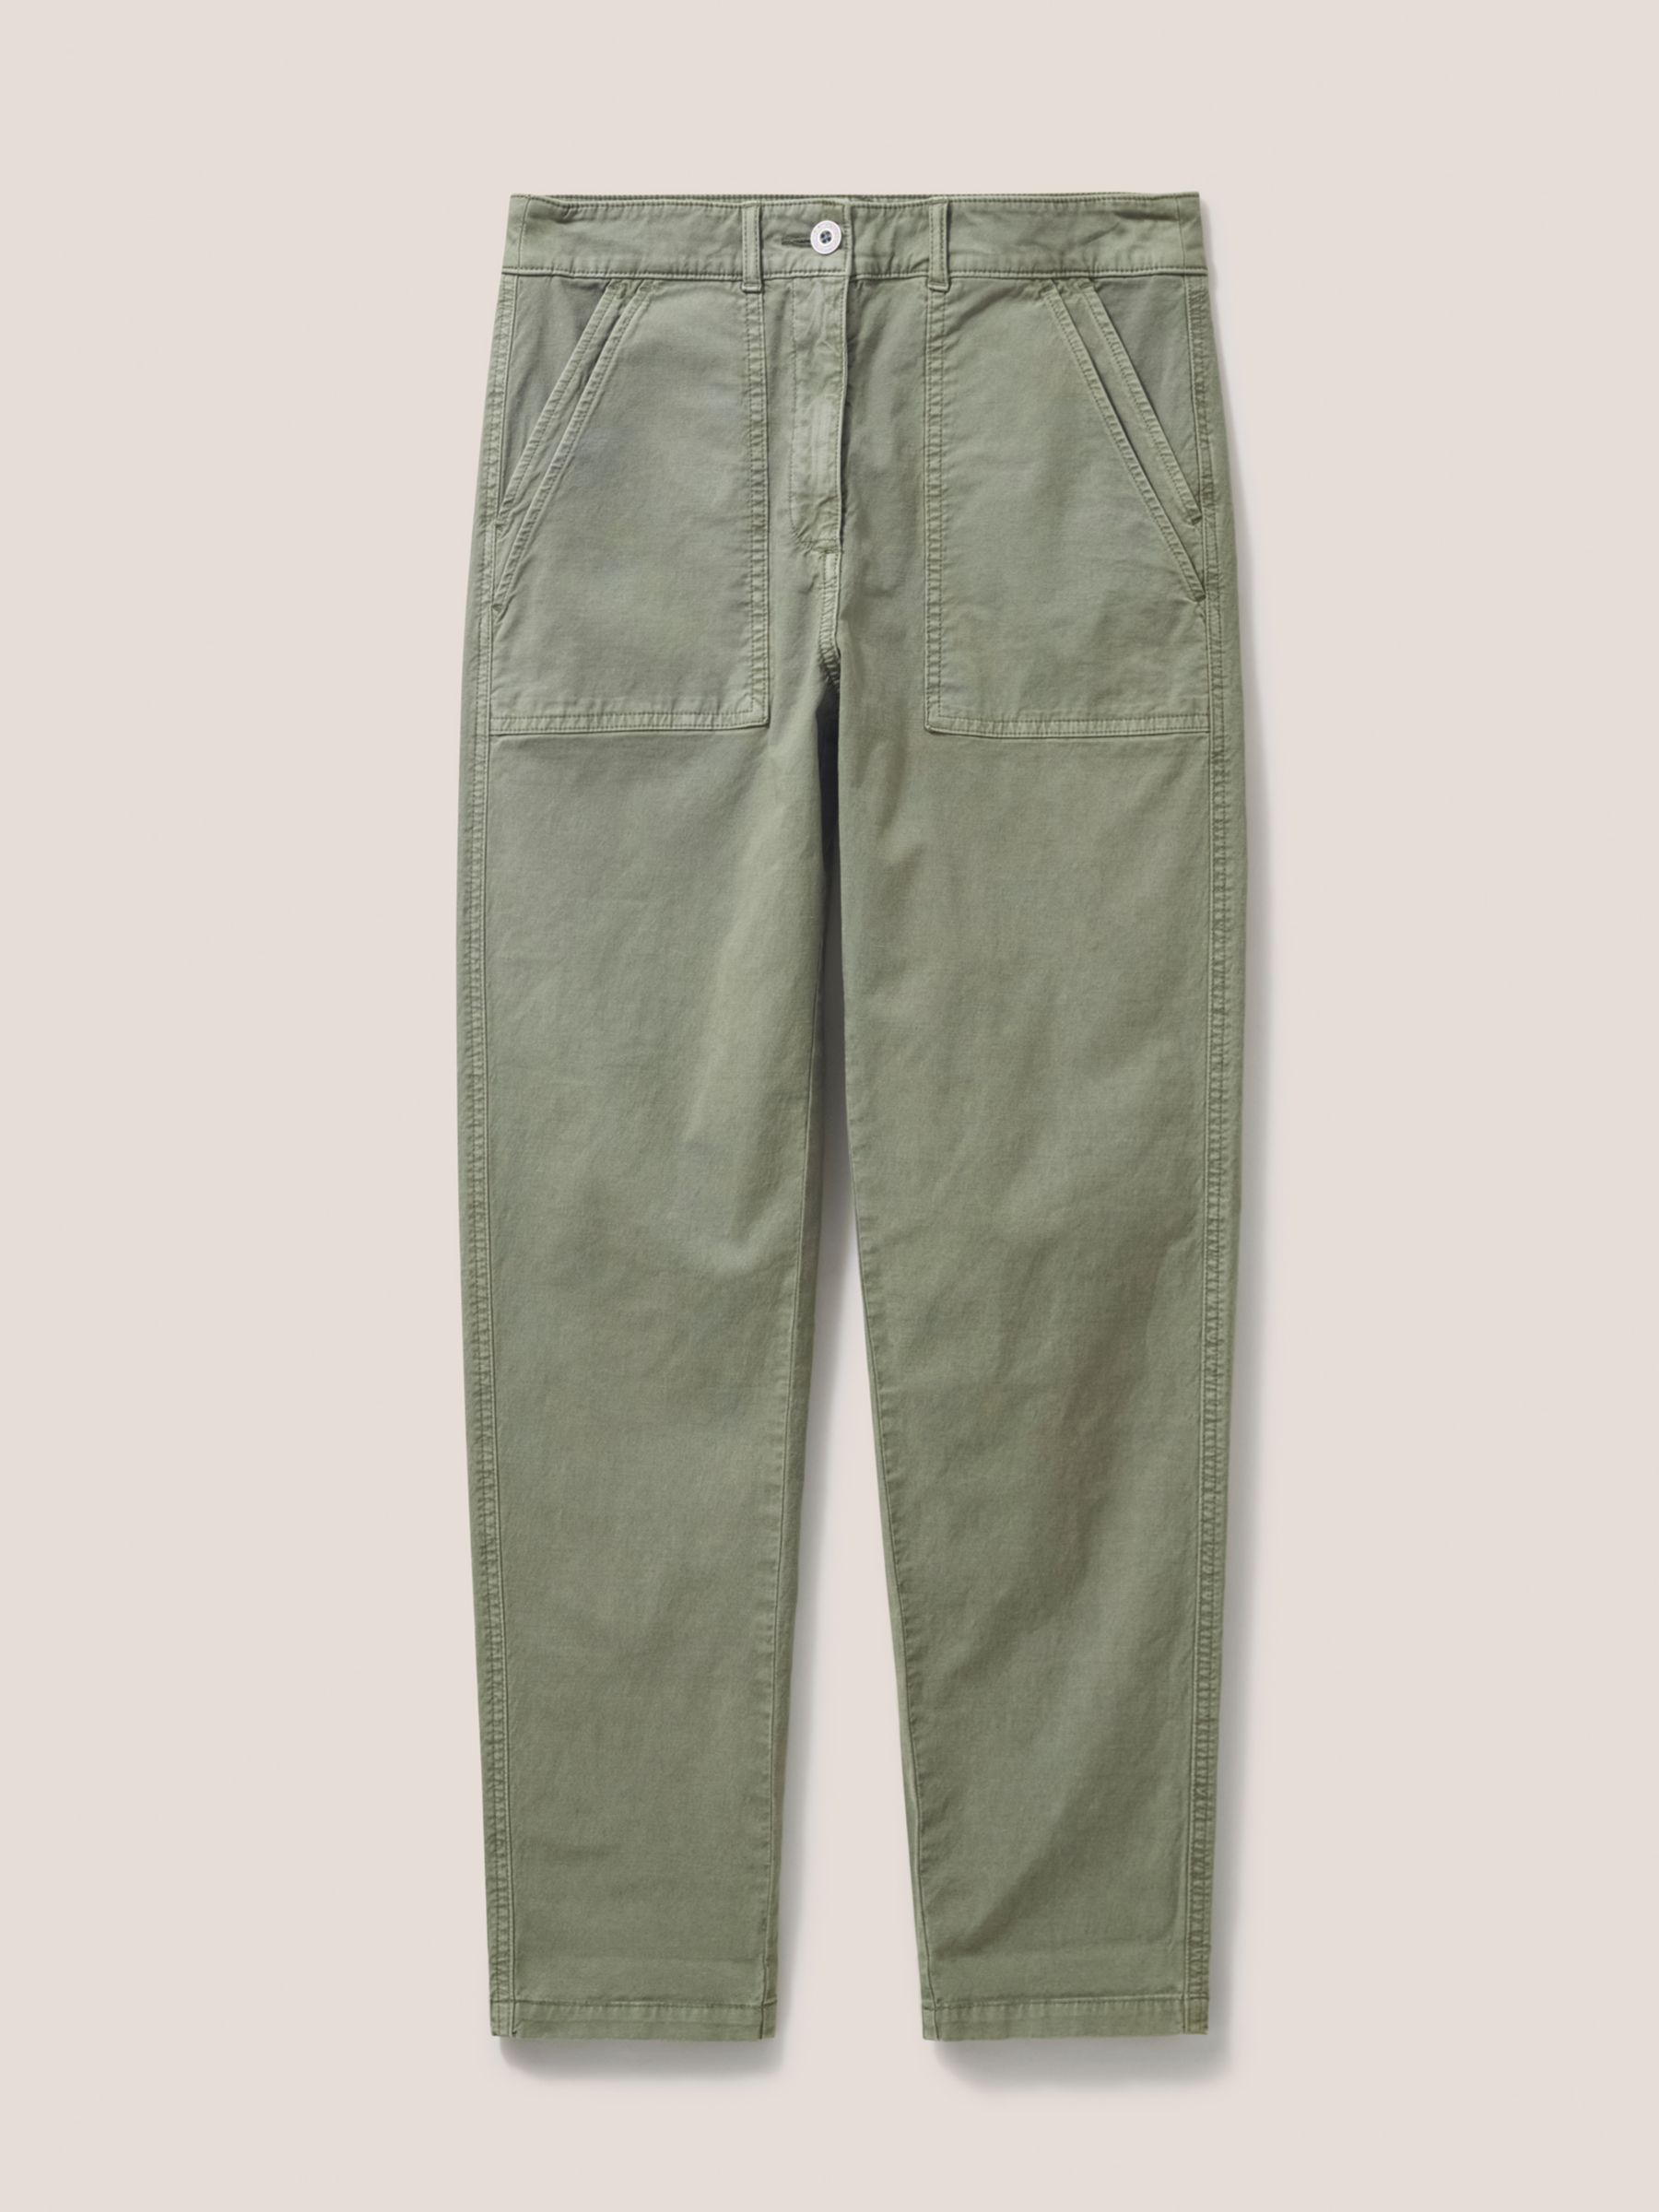 White Stuff Twister Chinos, Mid Green at John Lewis & Partners